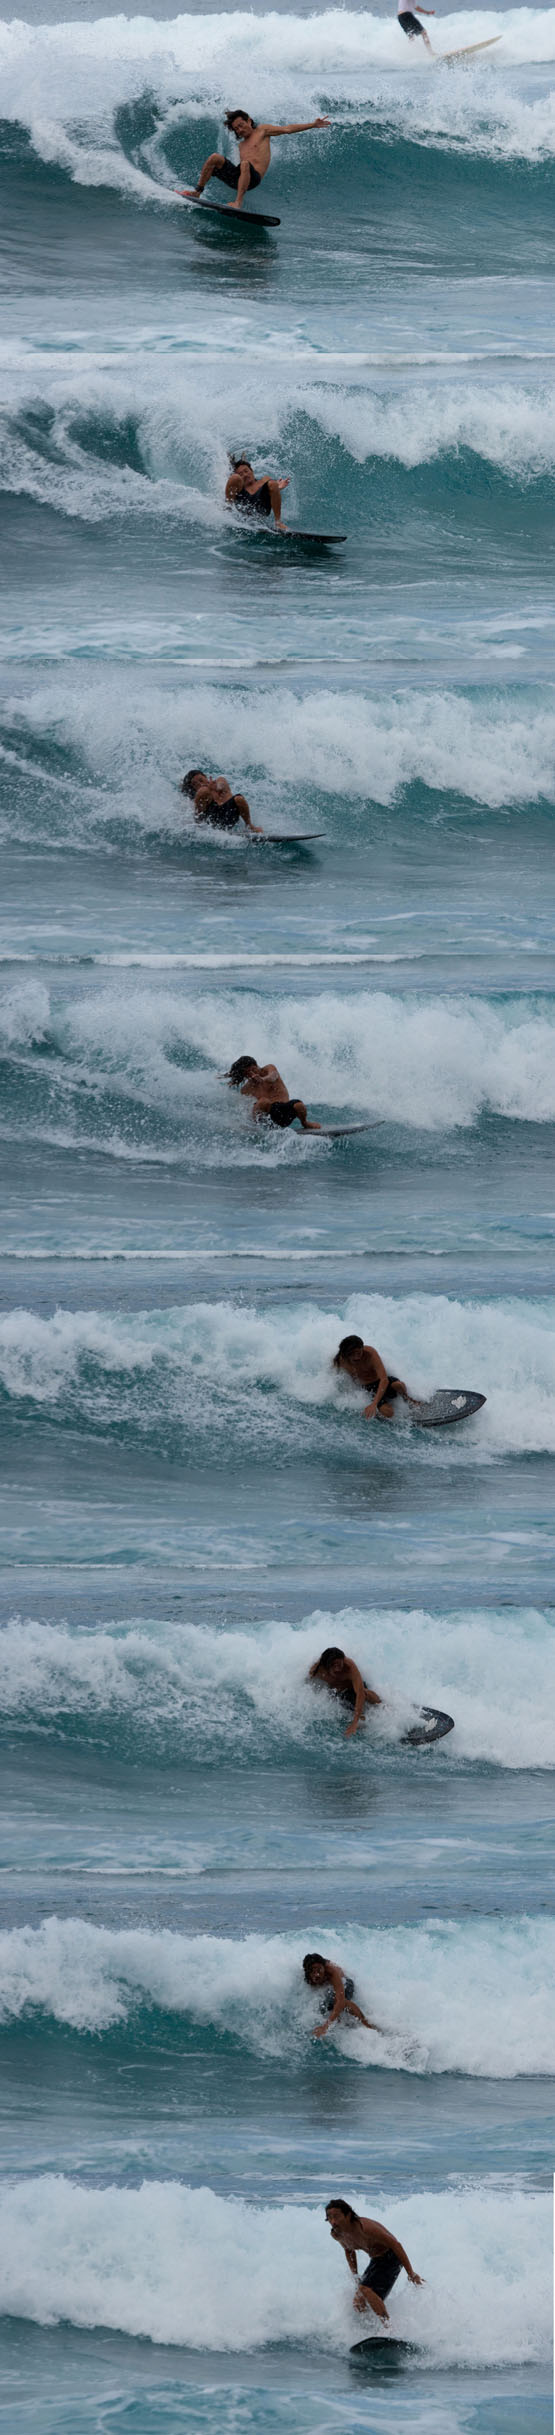 2010_NH_Surfing_SQ_T9399